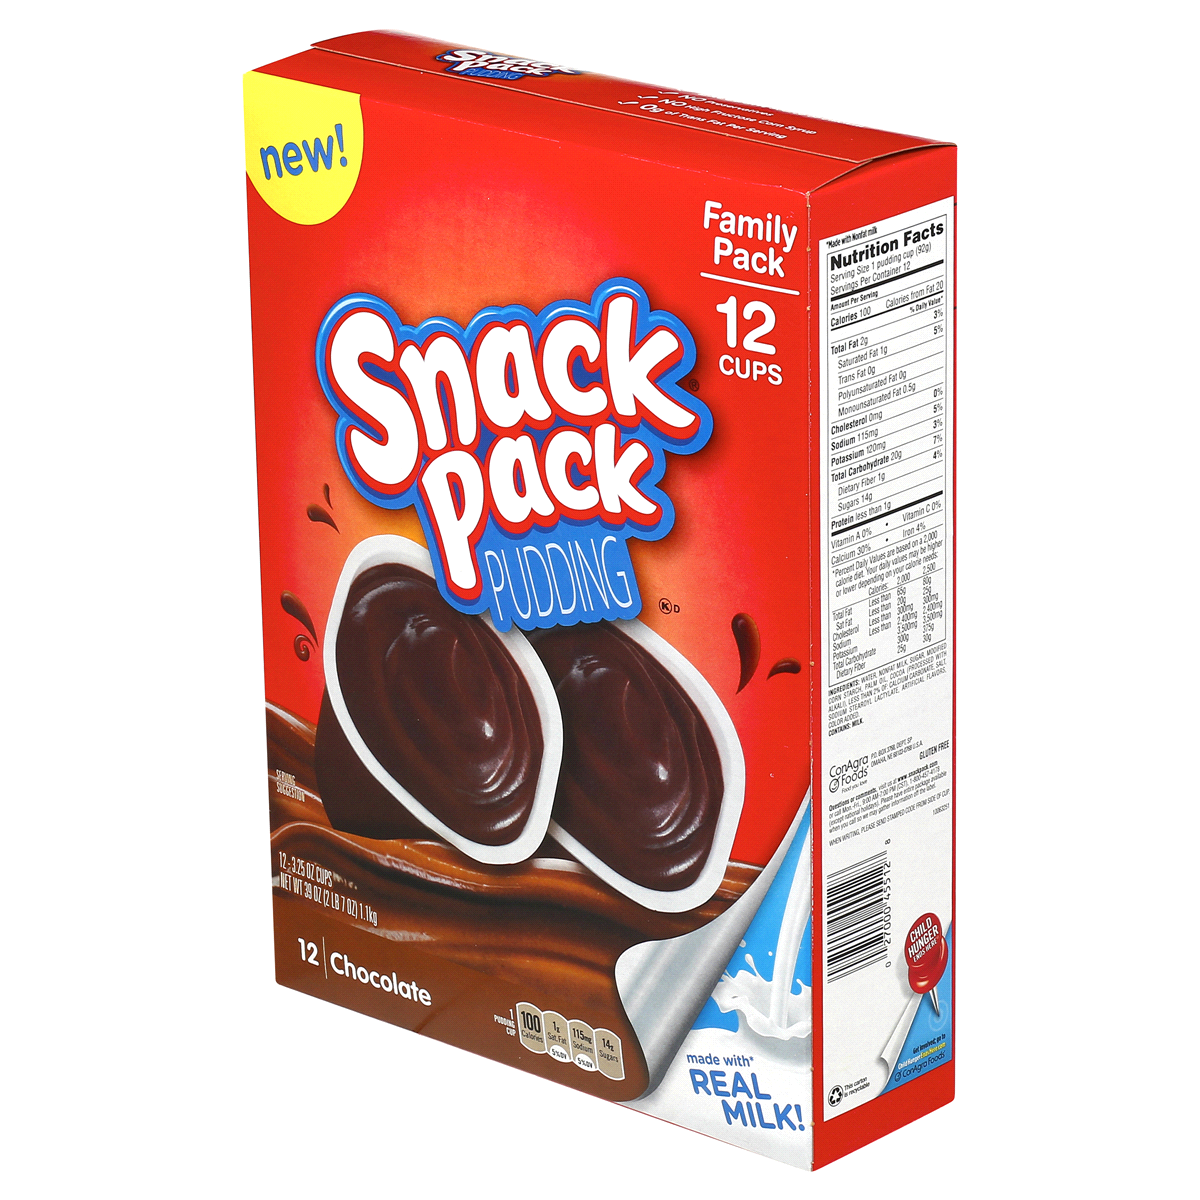 slide 3 of 6, Snack Pack Pudding Family Pack Chocolatecups, 39 oz